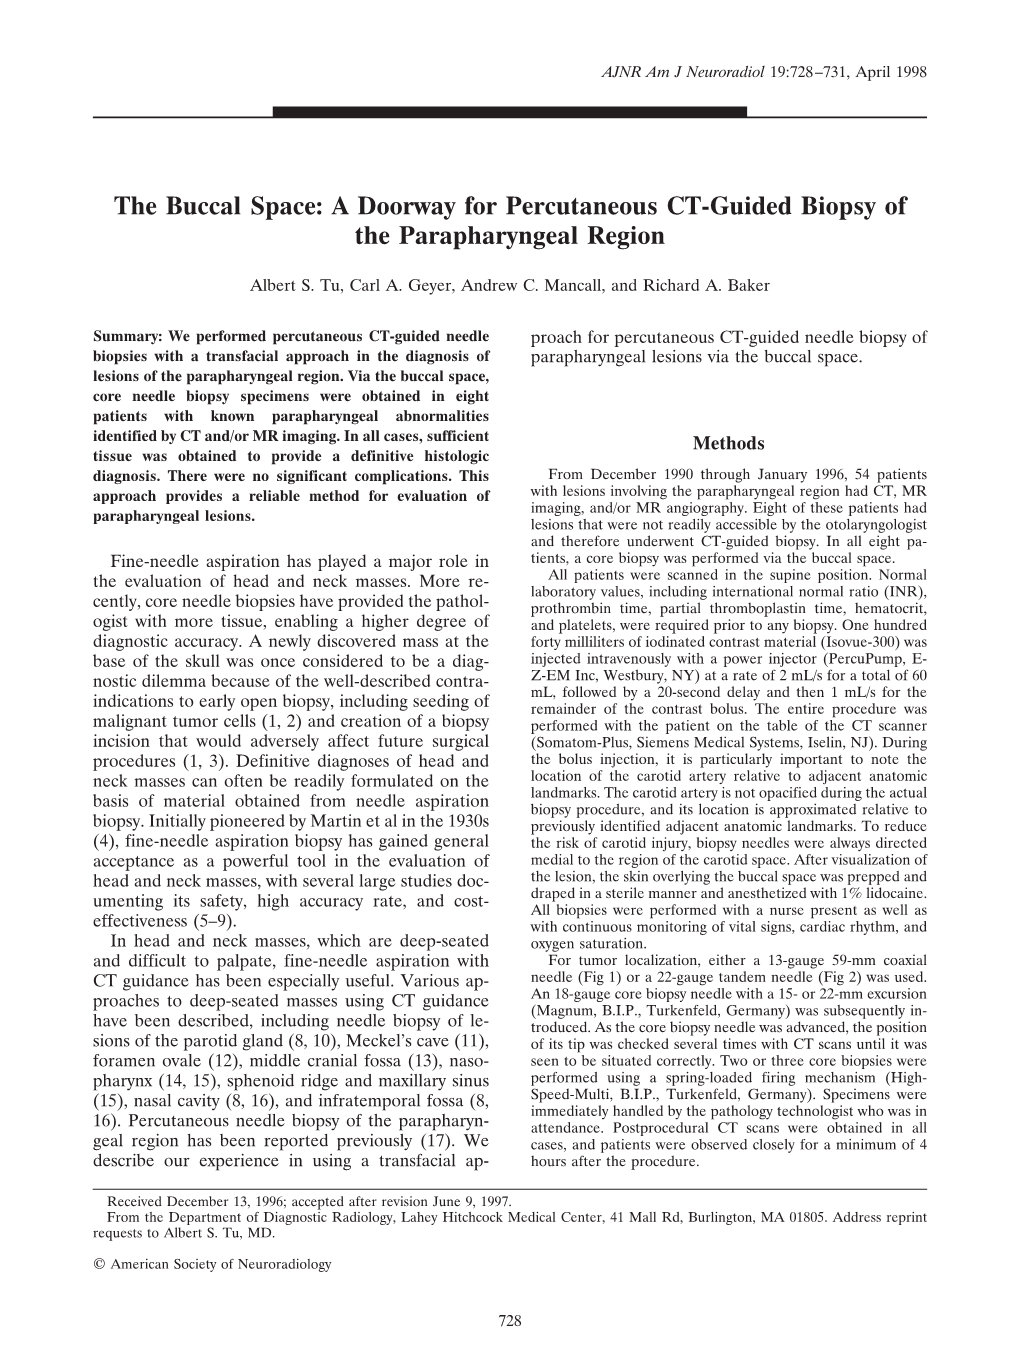 The Buccal Space: a Doorway for Percutaneous CT-Guided Biopsy of the Parapharyngeal Region